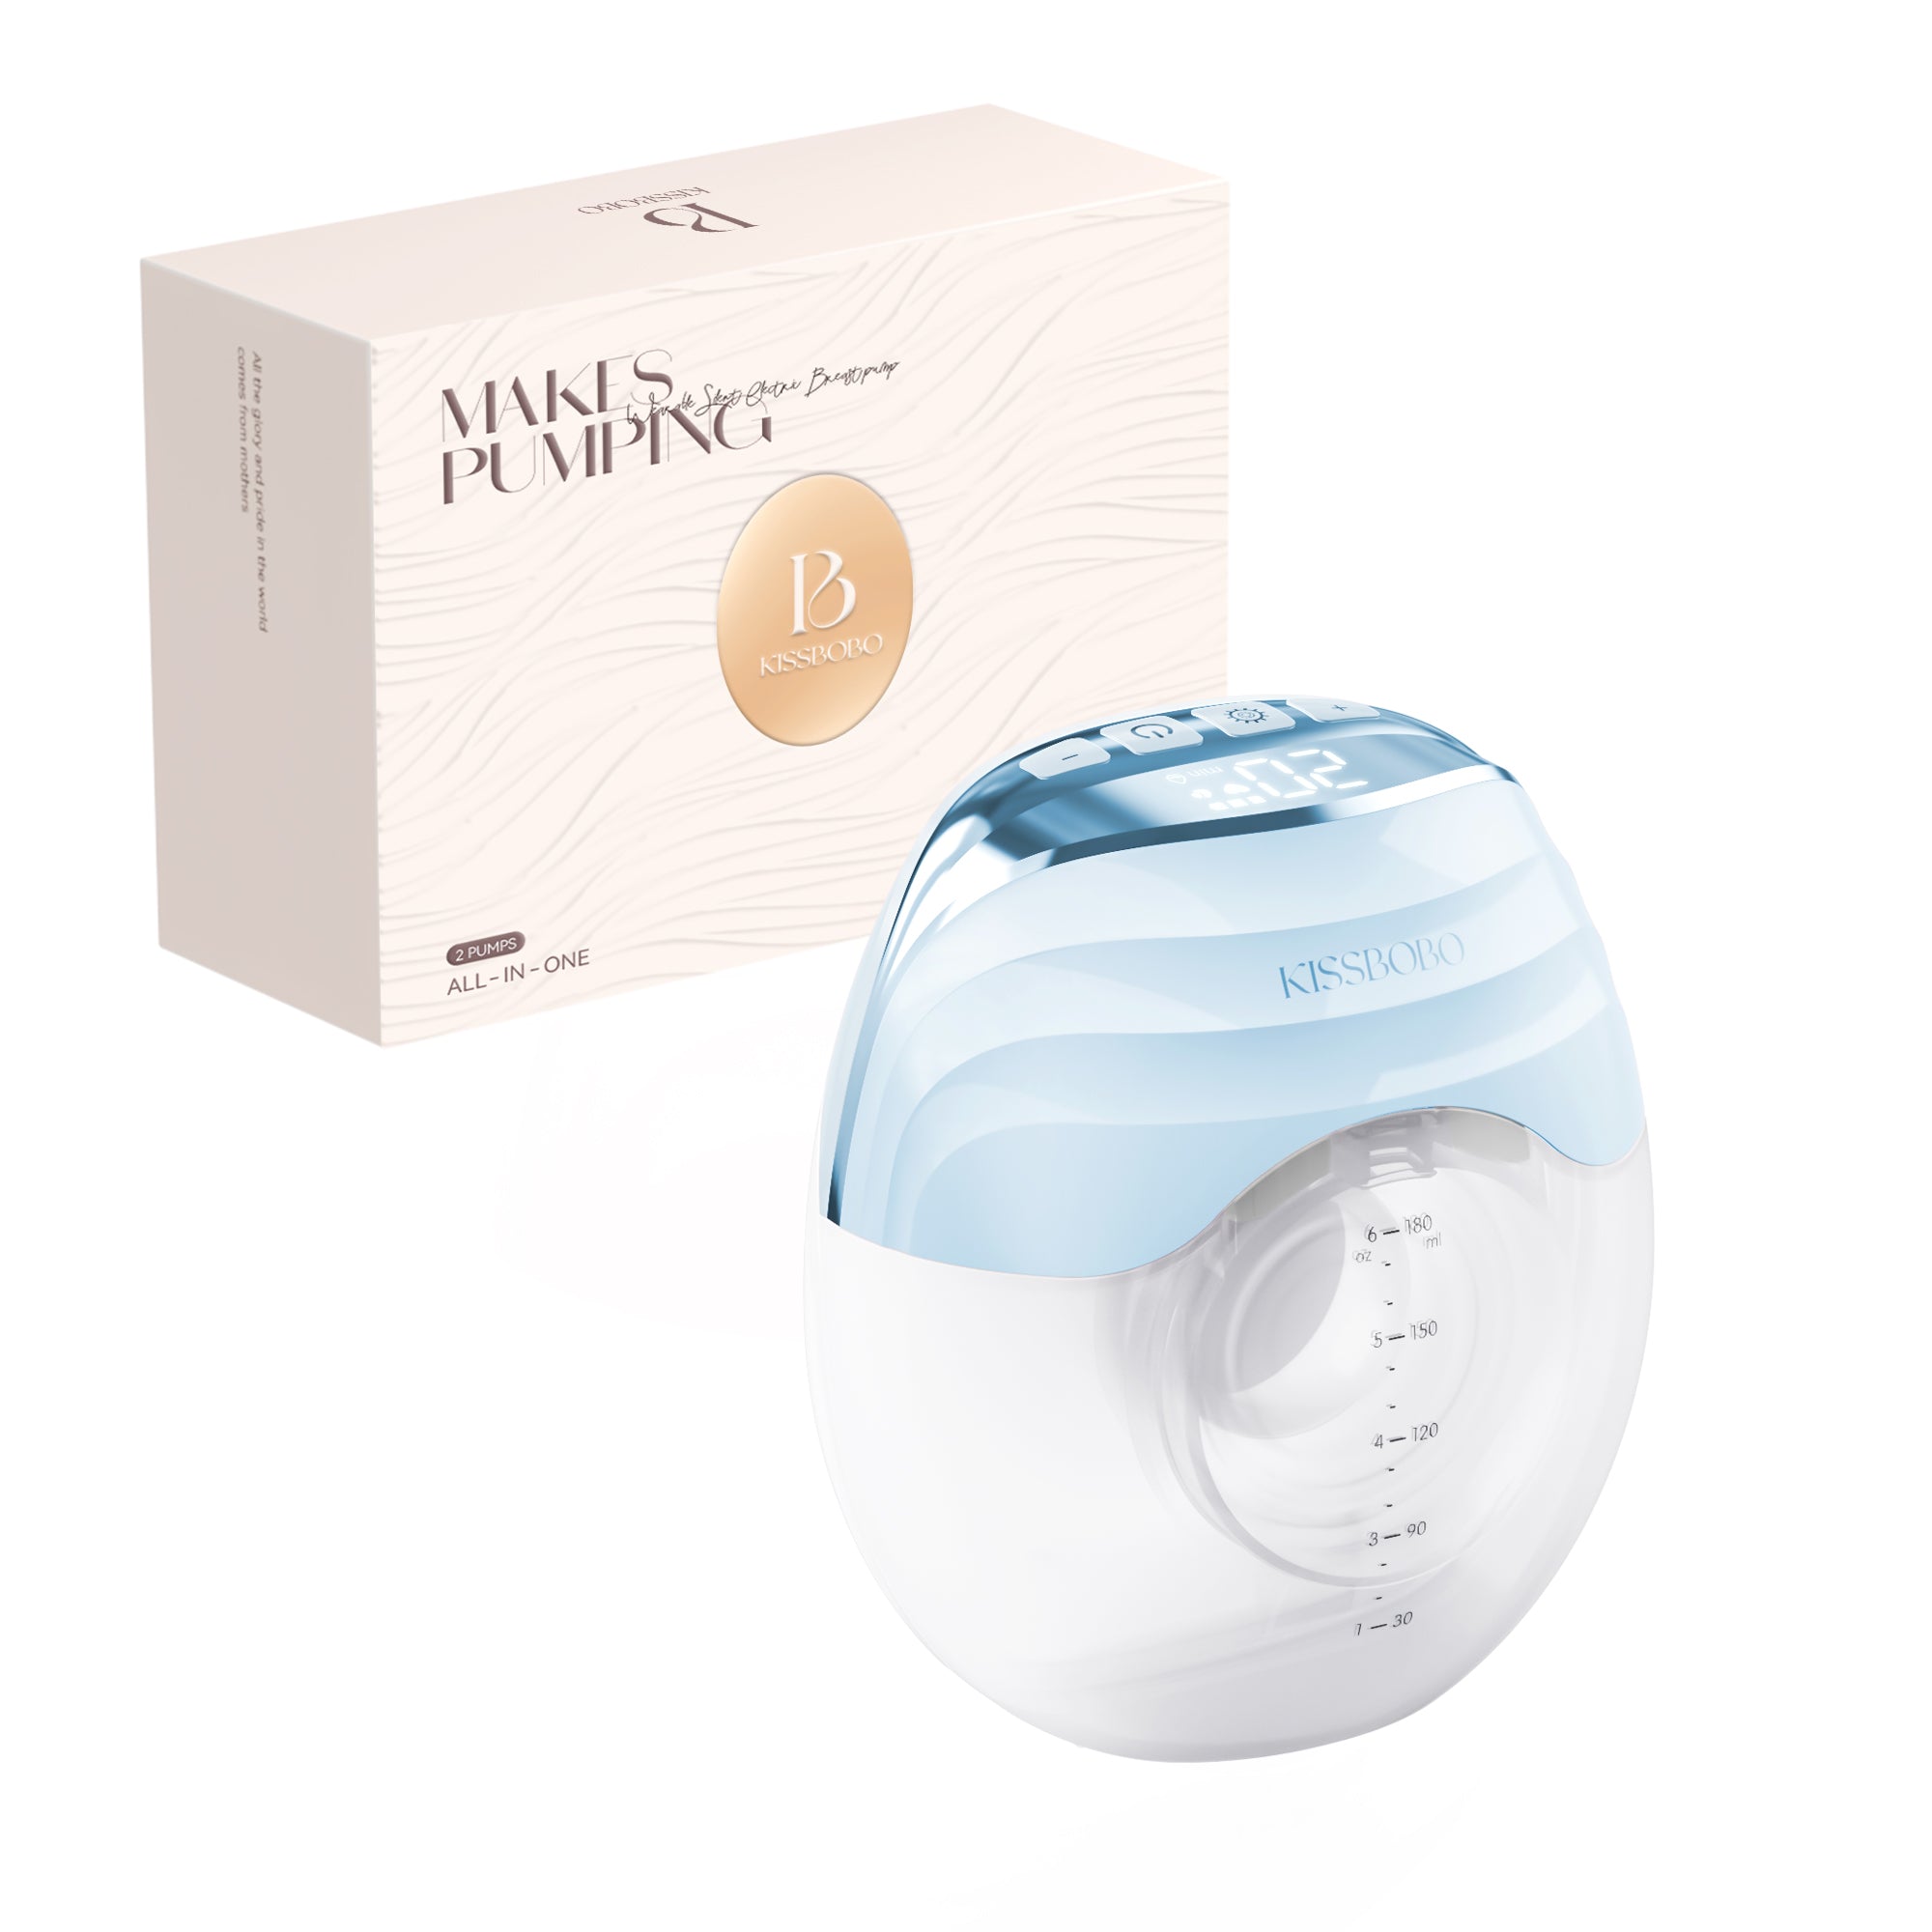 Wearable Breast Pump-More Invisible & Lighter GLE10 Set